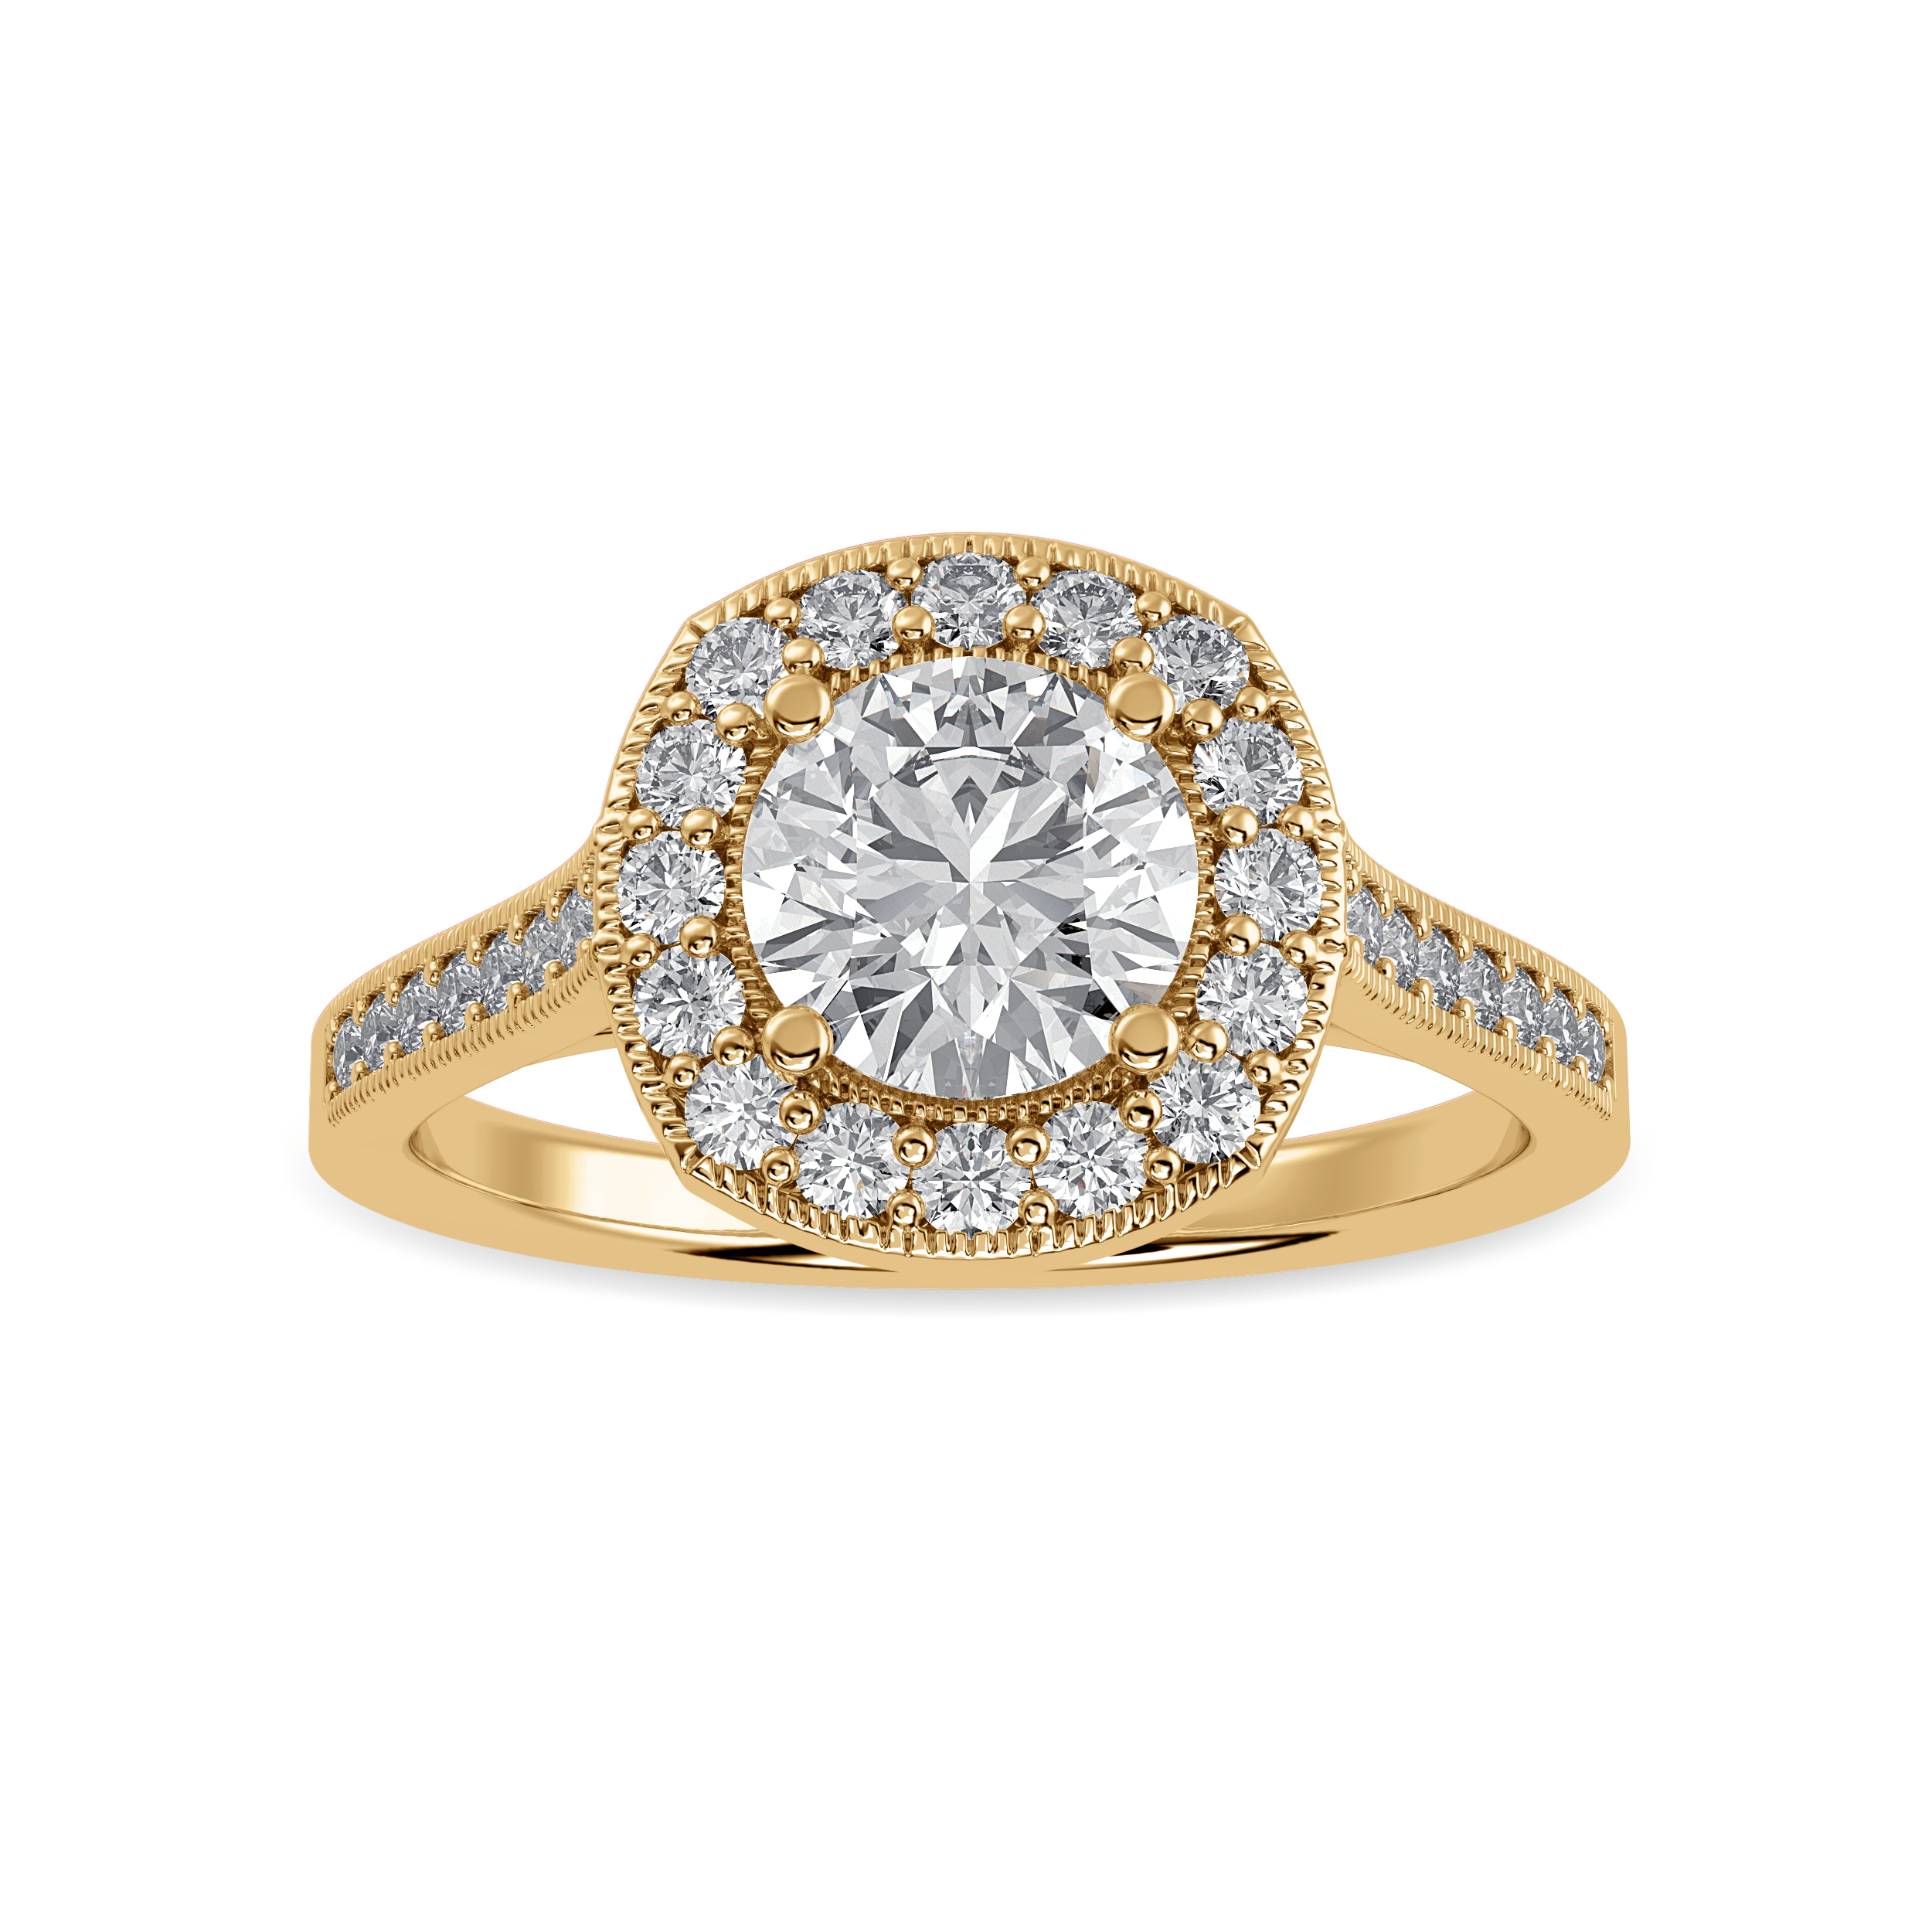 White Gold Engagement Rings: Round, Pear & More + Pro Tips | Dream engagement  rings, White gold engagement rings, Beautiful engagement rings